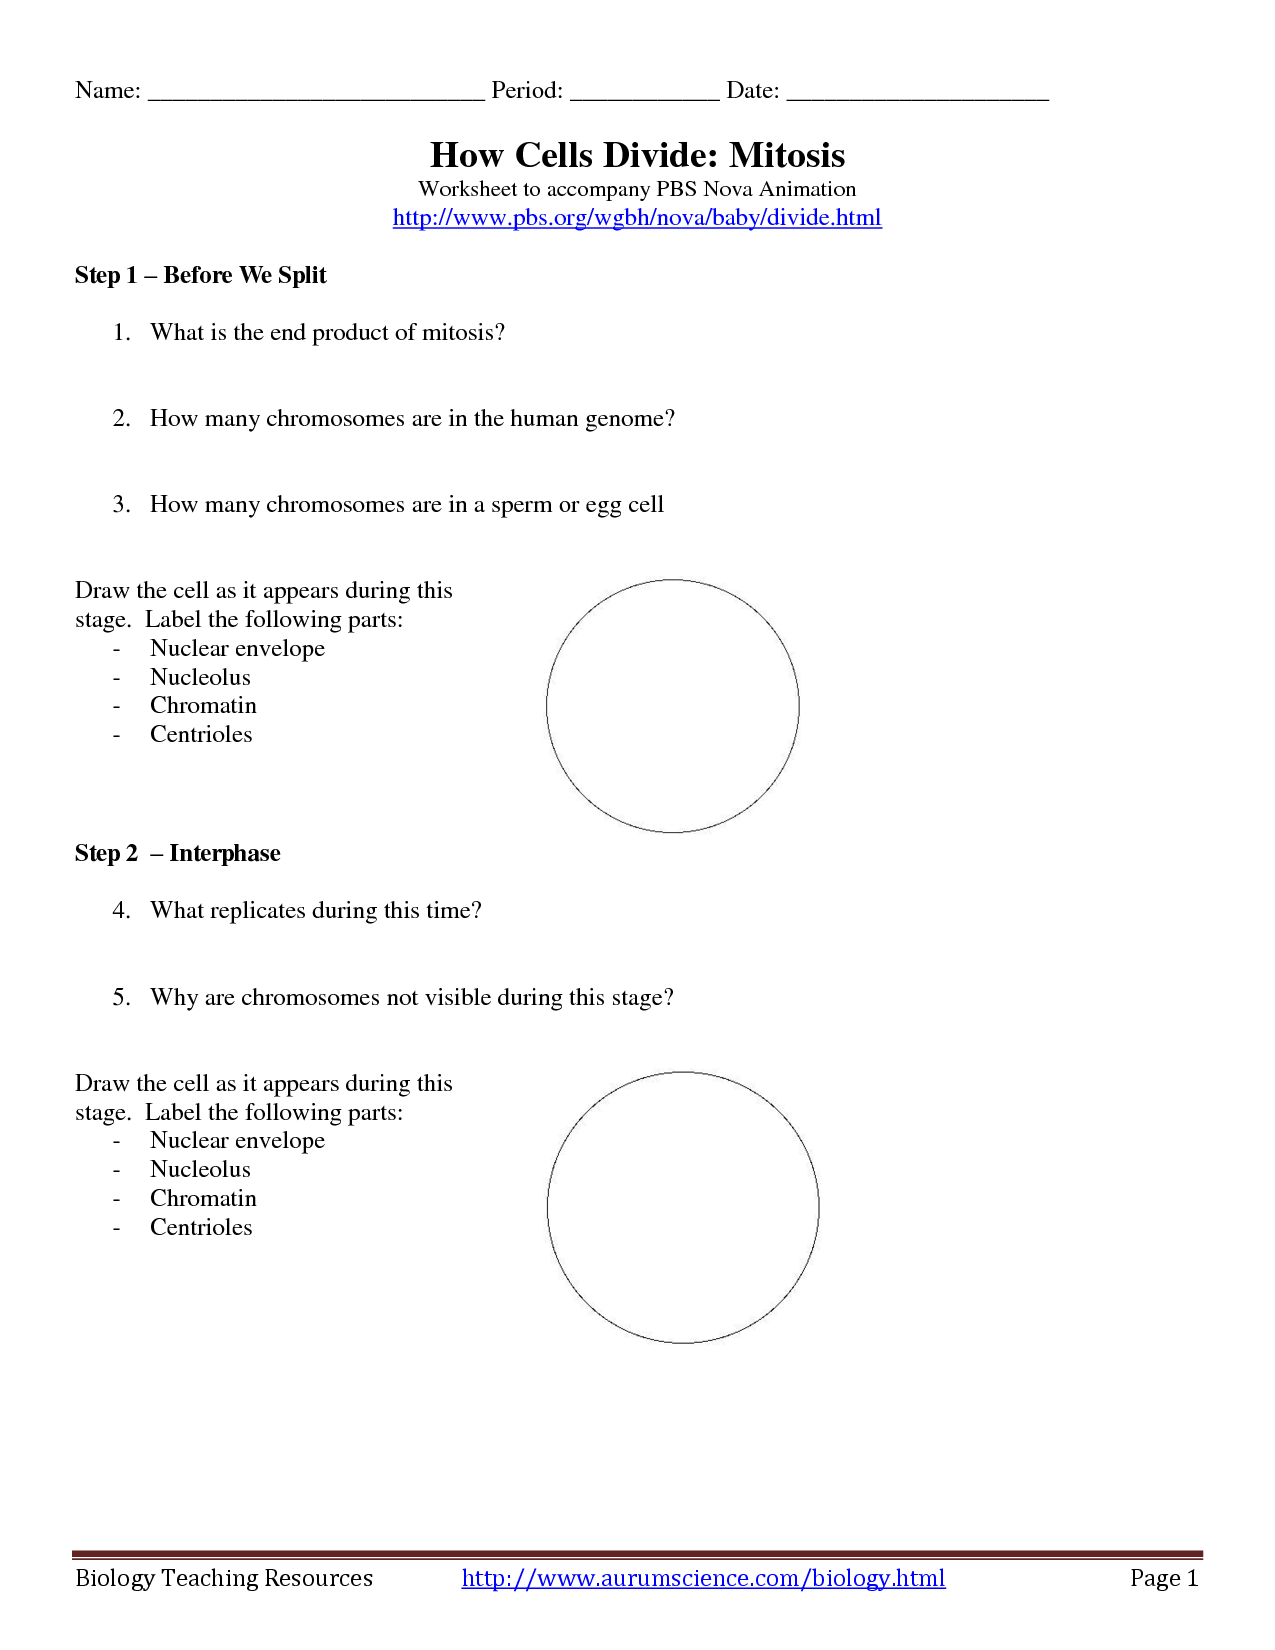 14 Best Images of Mitosis Worksheet Answers Crossword  Cell Division Crossword Puzzle Answer 